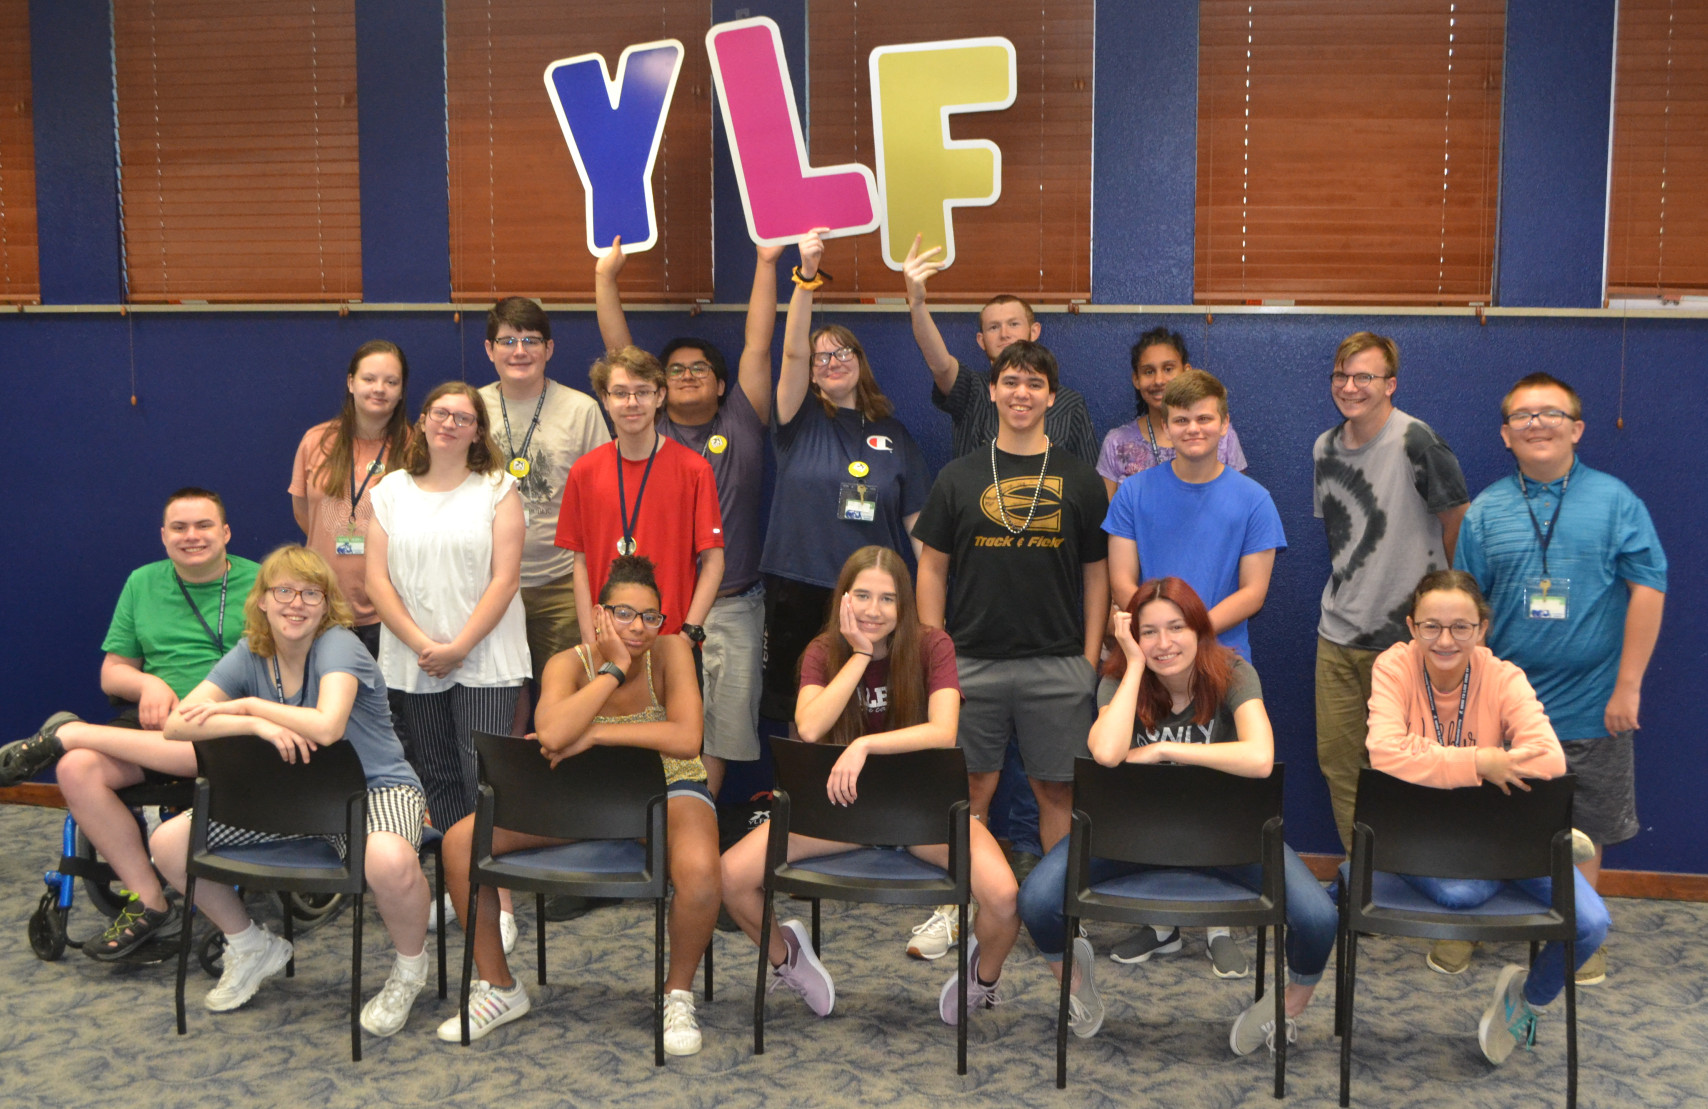 The 2023 KSYLF delegates smile while taking a group photo and holding up big YLF letters.